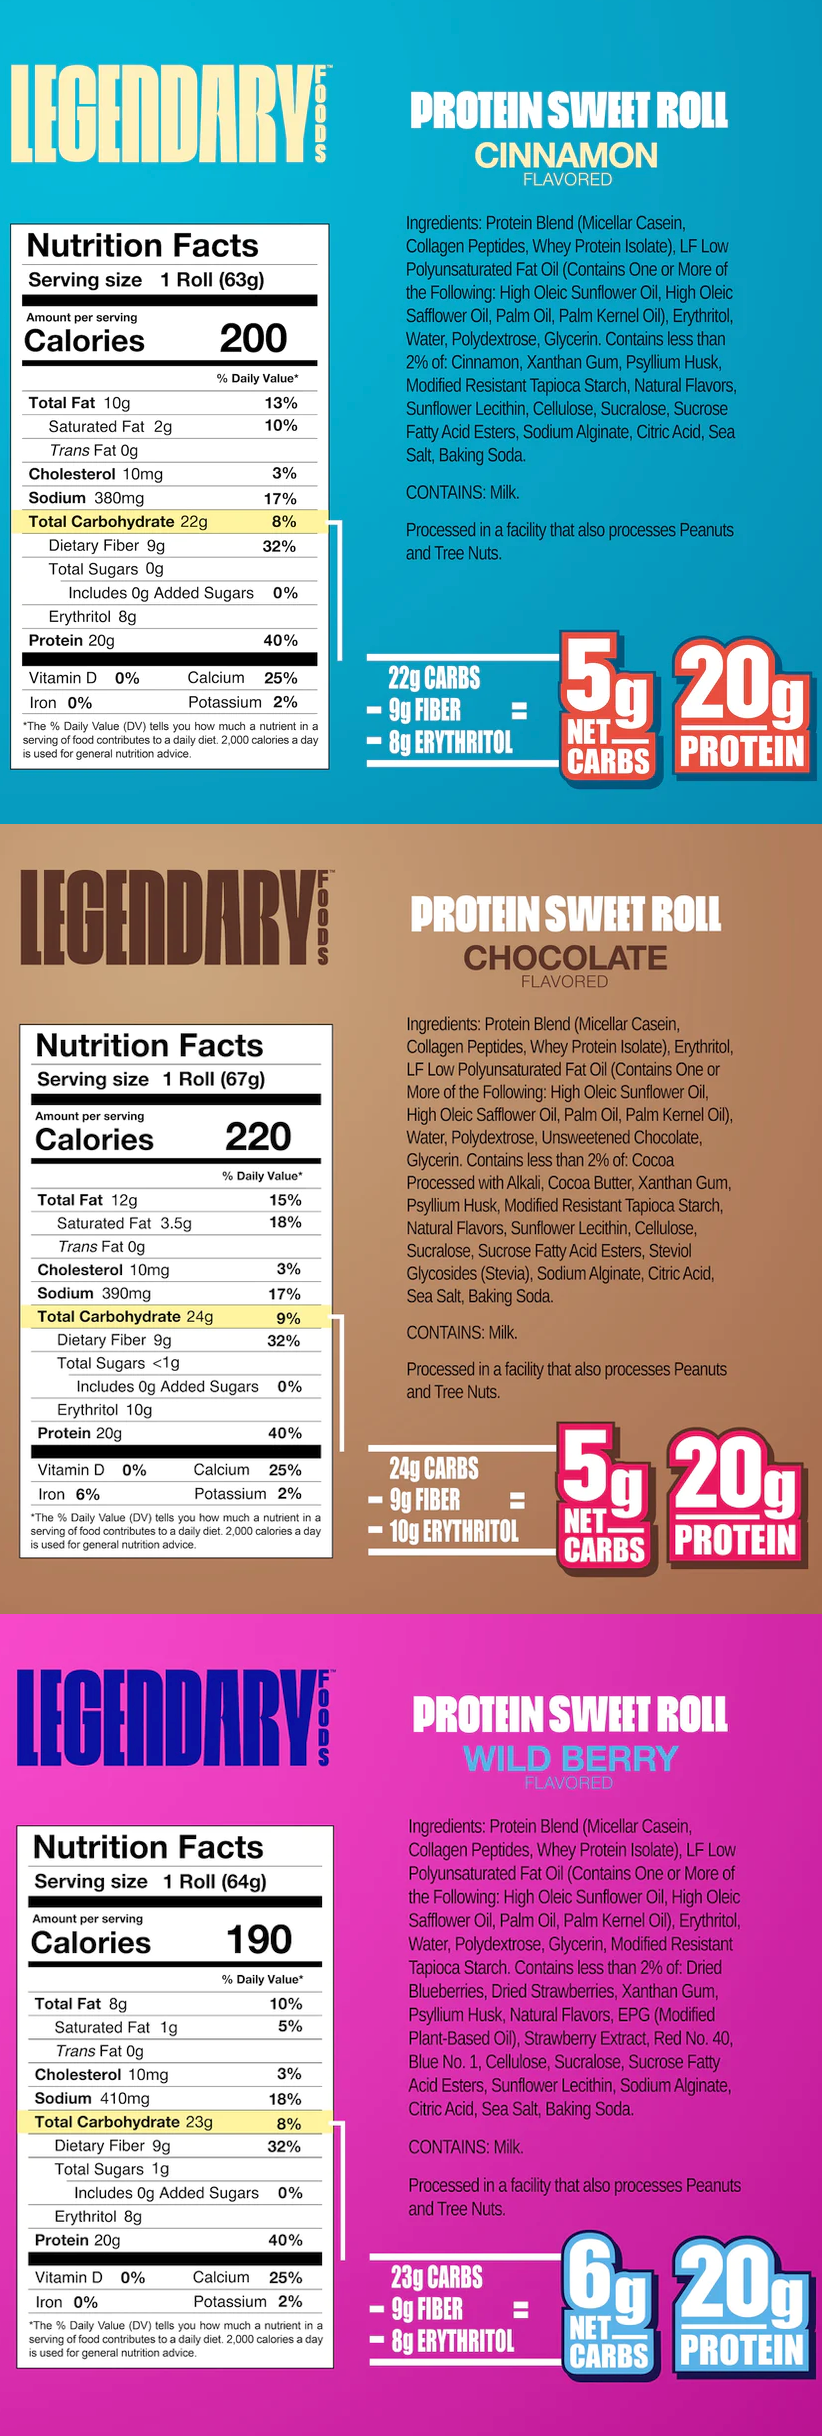 Nutrition facts and ingredients for Legendary brand Protein Sweet Rolls in various flavors including chocolate, cinnamon, and wild berry.